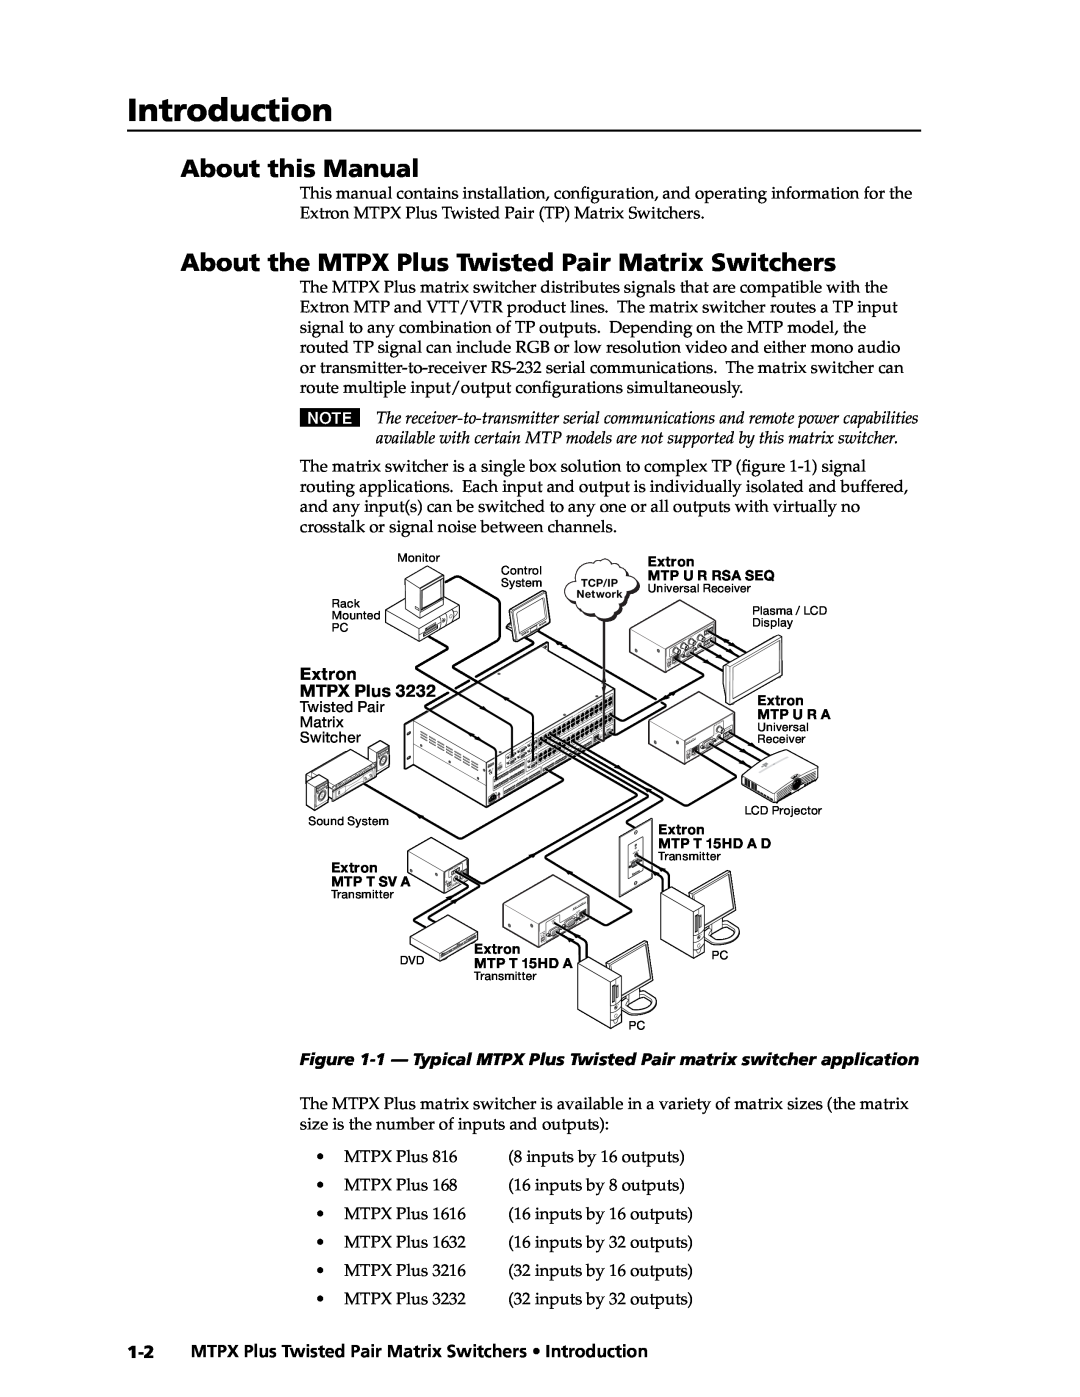 Extron electronic MTPX Plus Series Introduction, About this Manual, About the MTPX Plus Twisted Pair Matrix Switchers 